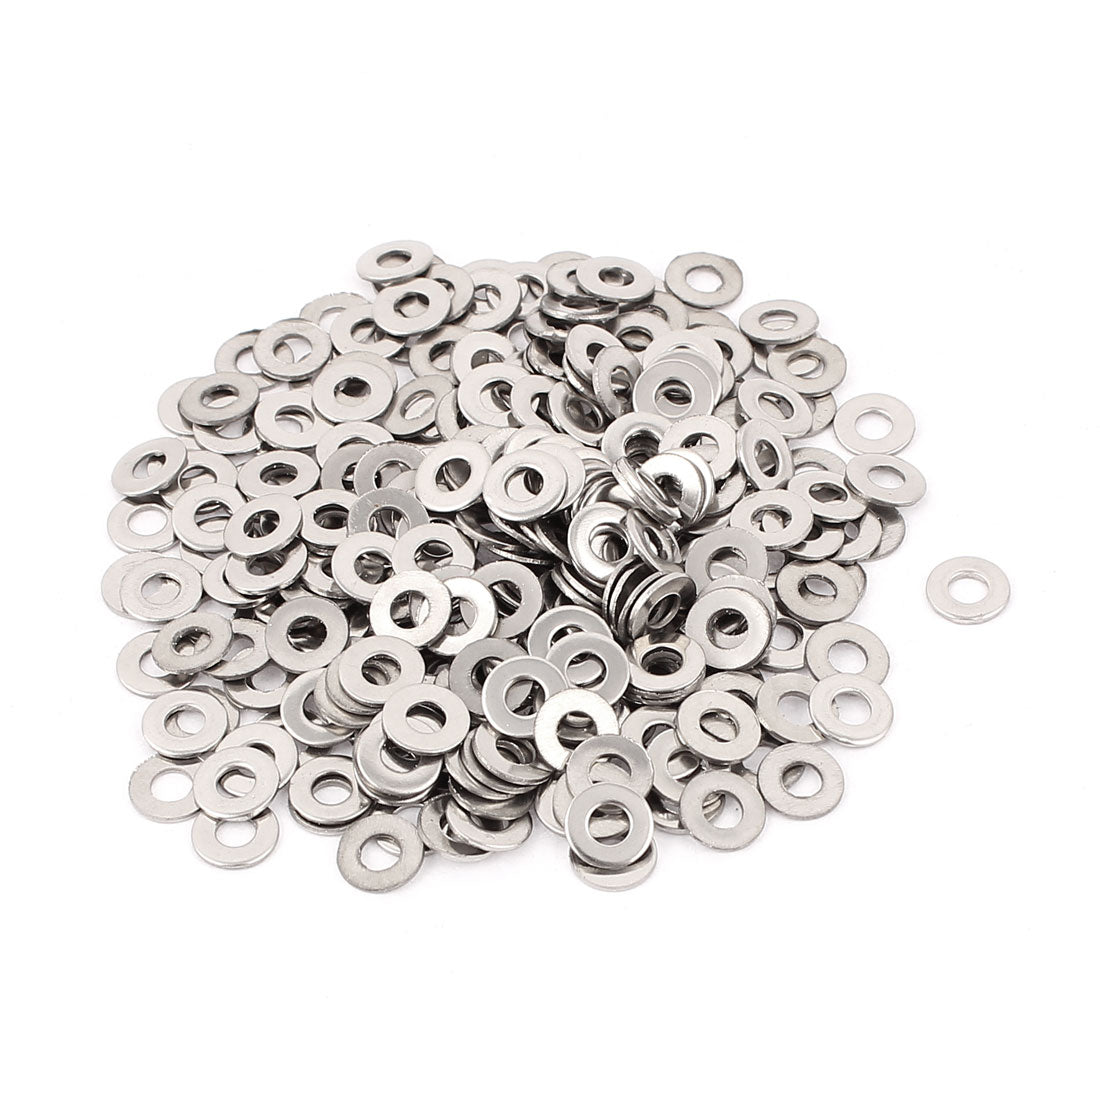 uxcell Uxcell 300pcs 3mm Flat Stainless Steel Washers Spacers for M3 Threaded Screws